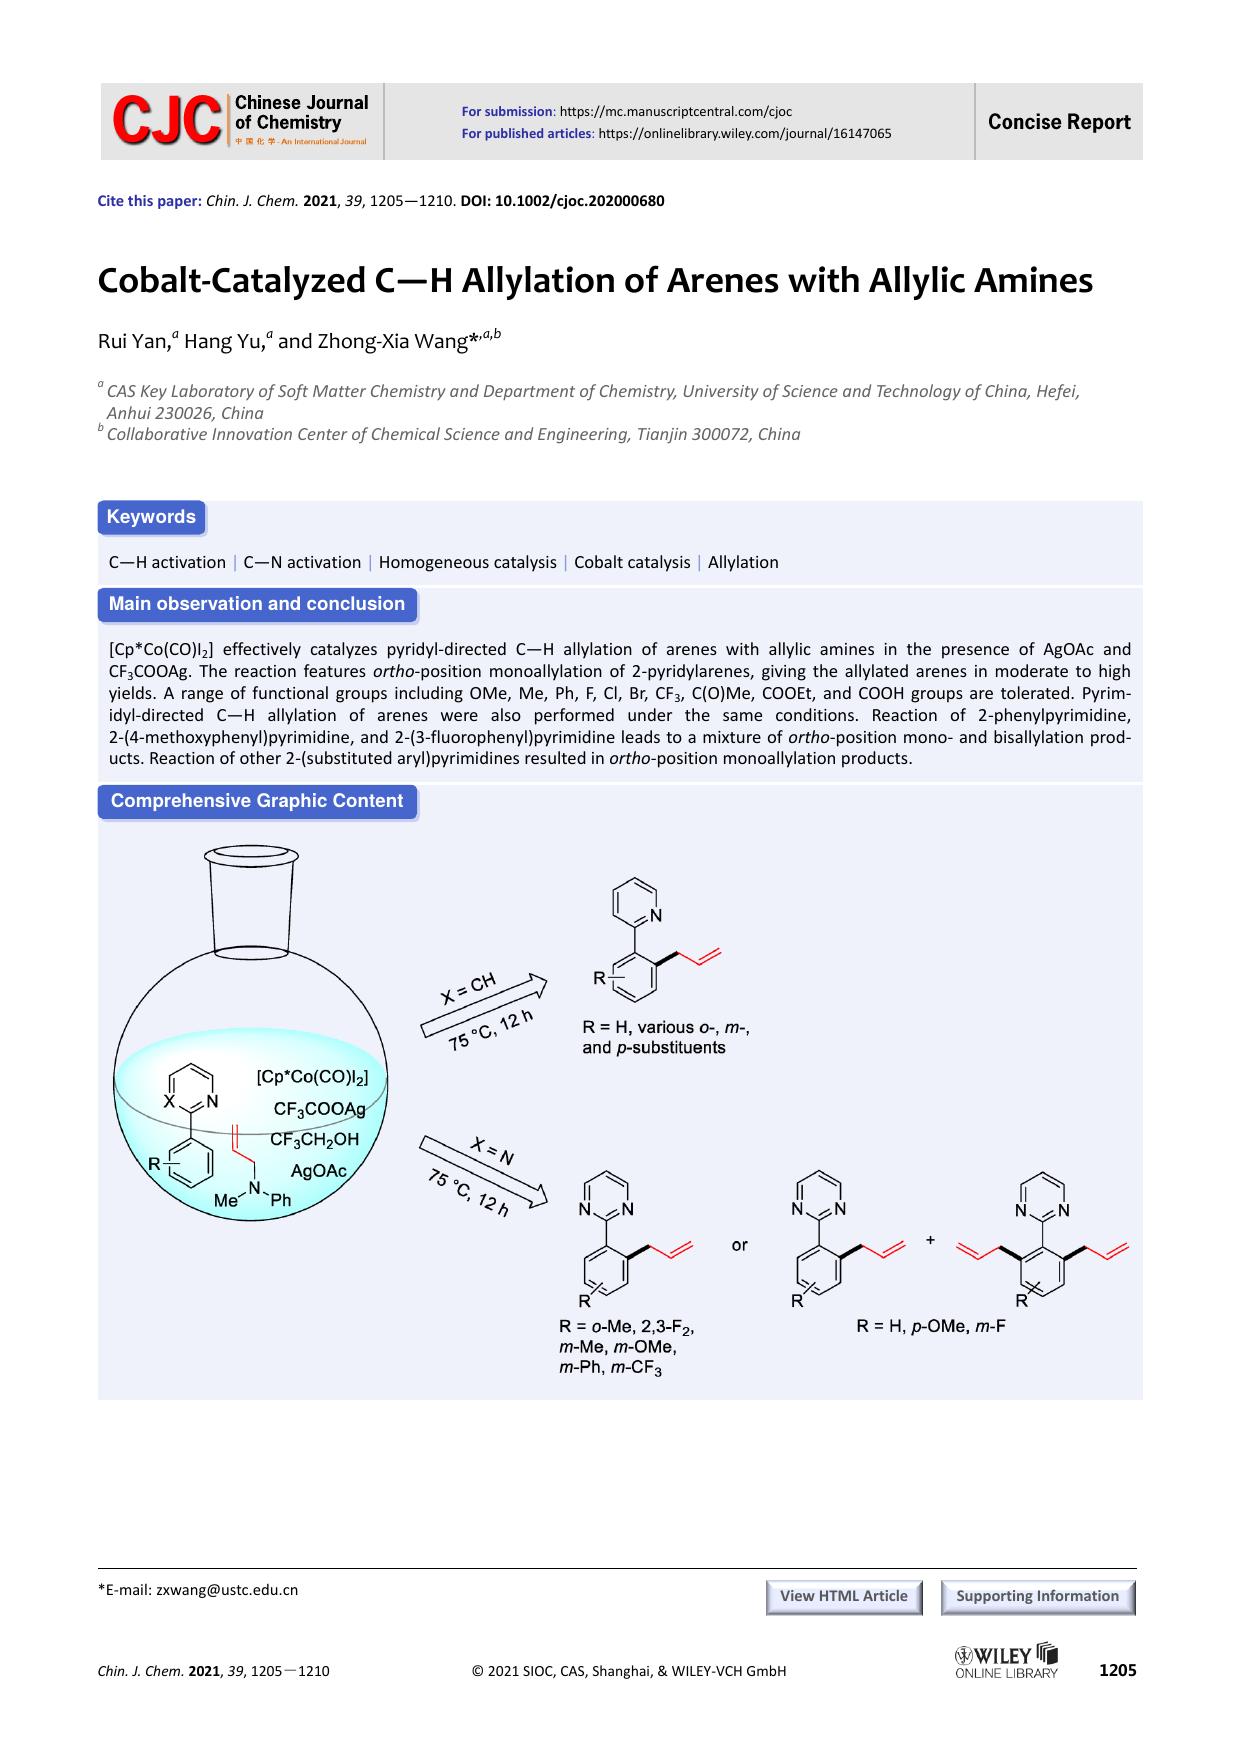 Cobalt-Catalyzed C-H Allylation of Arenes with Allylic Amines by grh